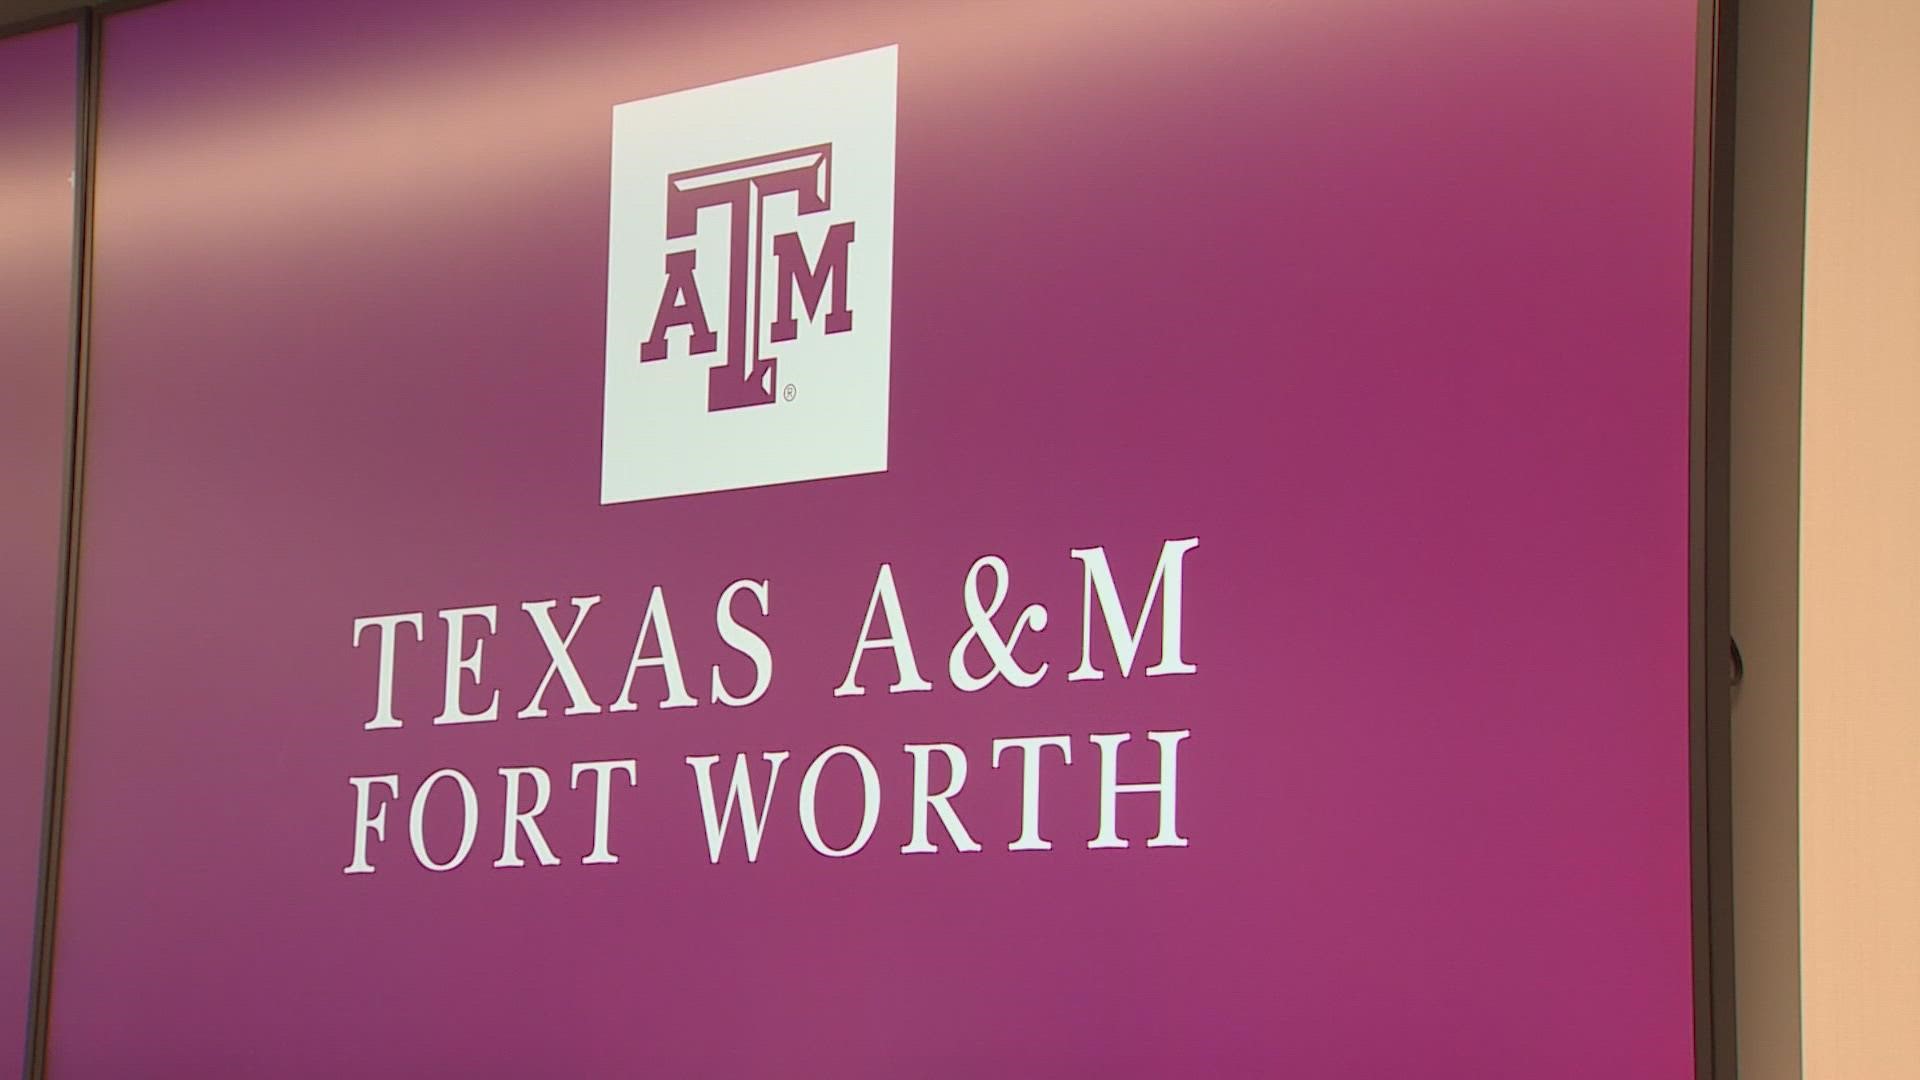 Texas A&M Universitys leadership revealed the name of its future downtown Fort Worth research campus and gave an update on construction plans.